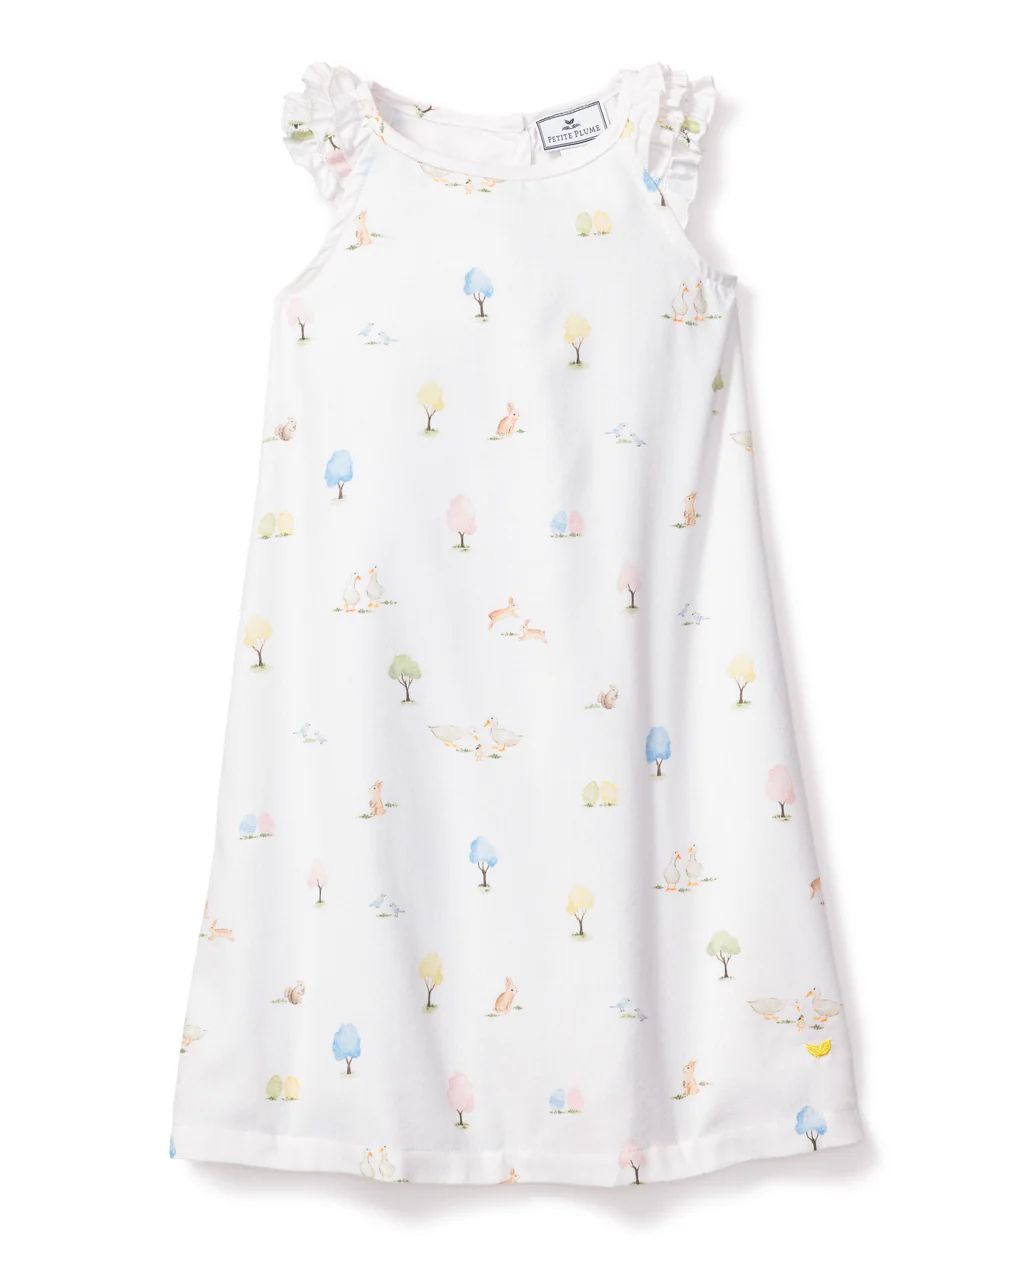 Children's Easter Gardens Amelie Nightgown | Petite Plume